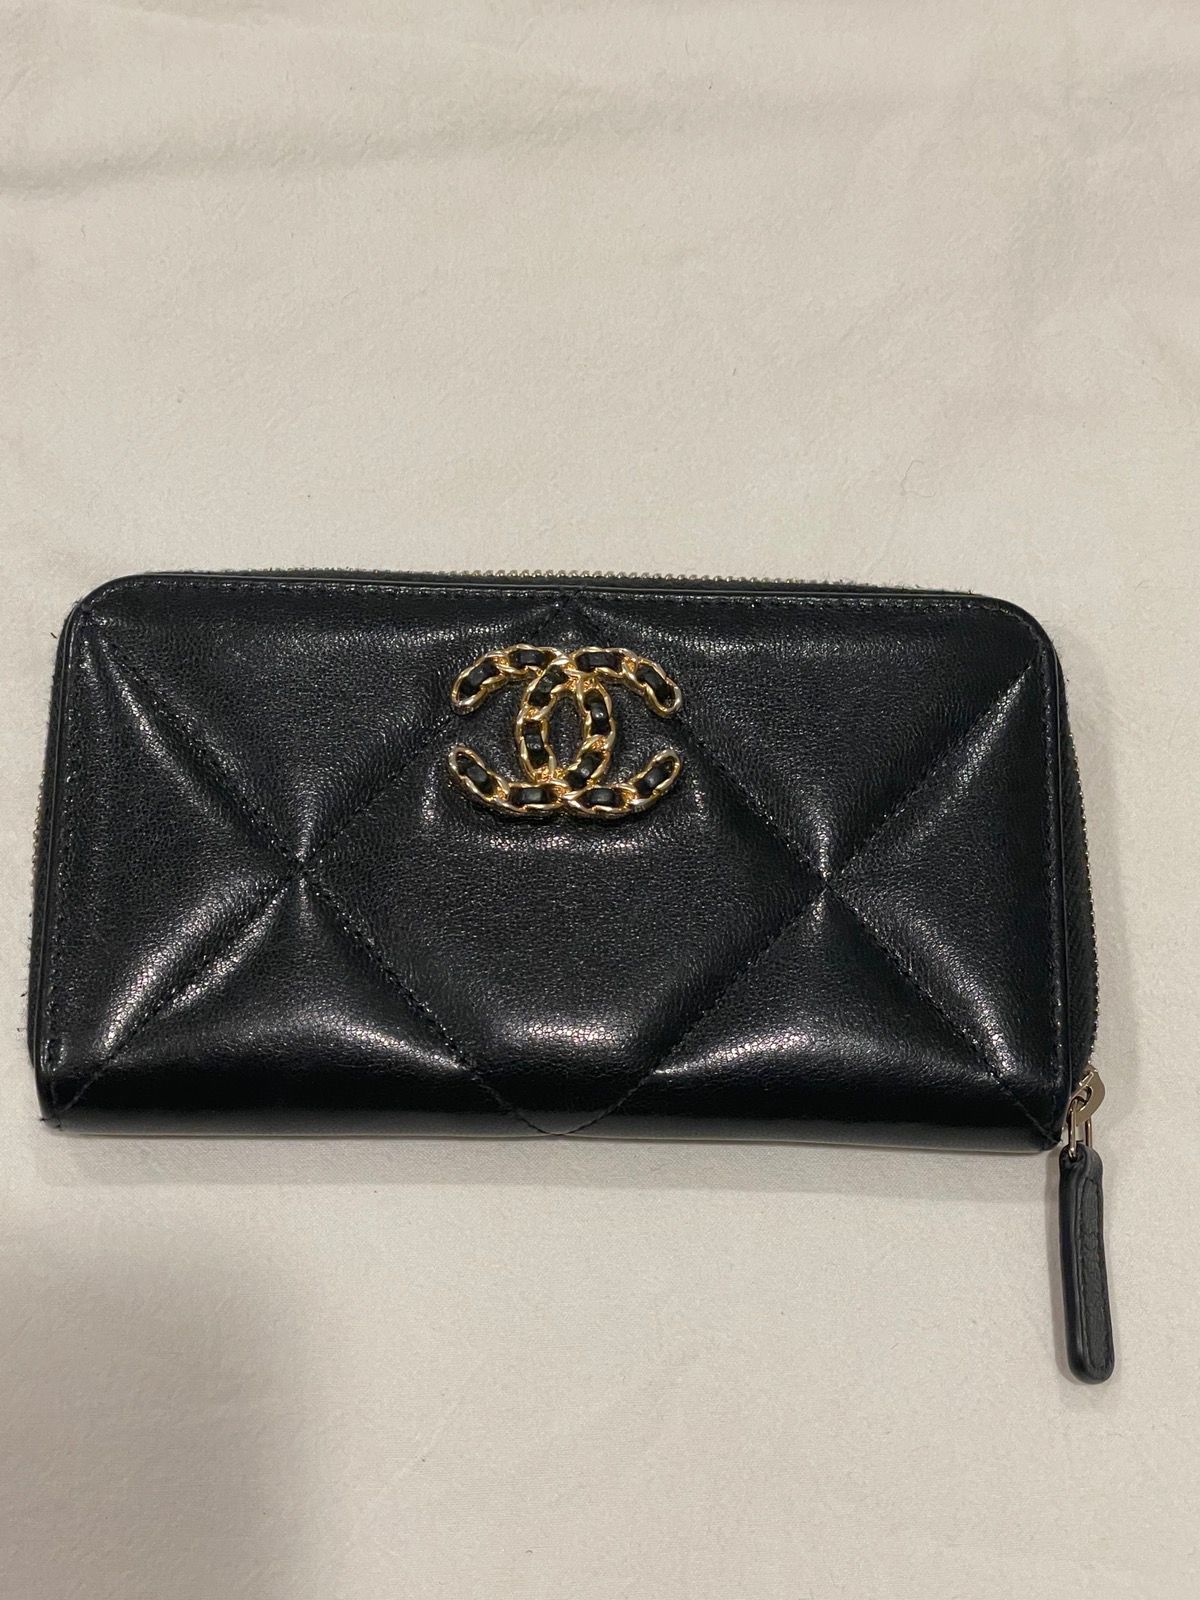 Chanel Chanel 19 Zipped Quilted Lambskim Black Wallet